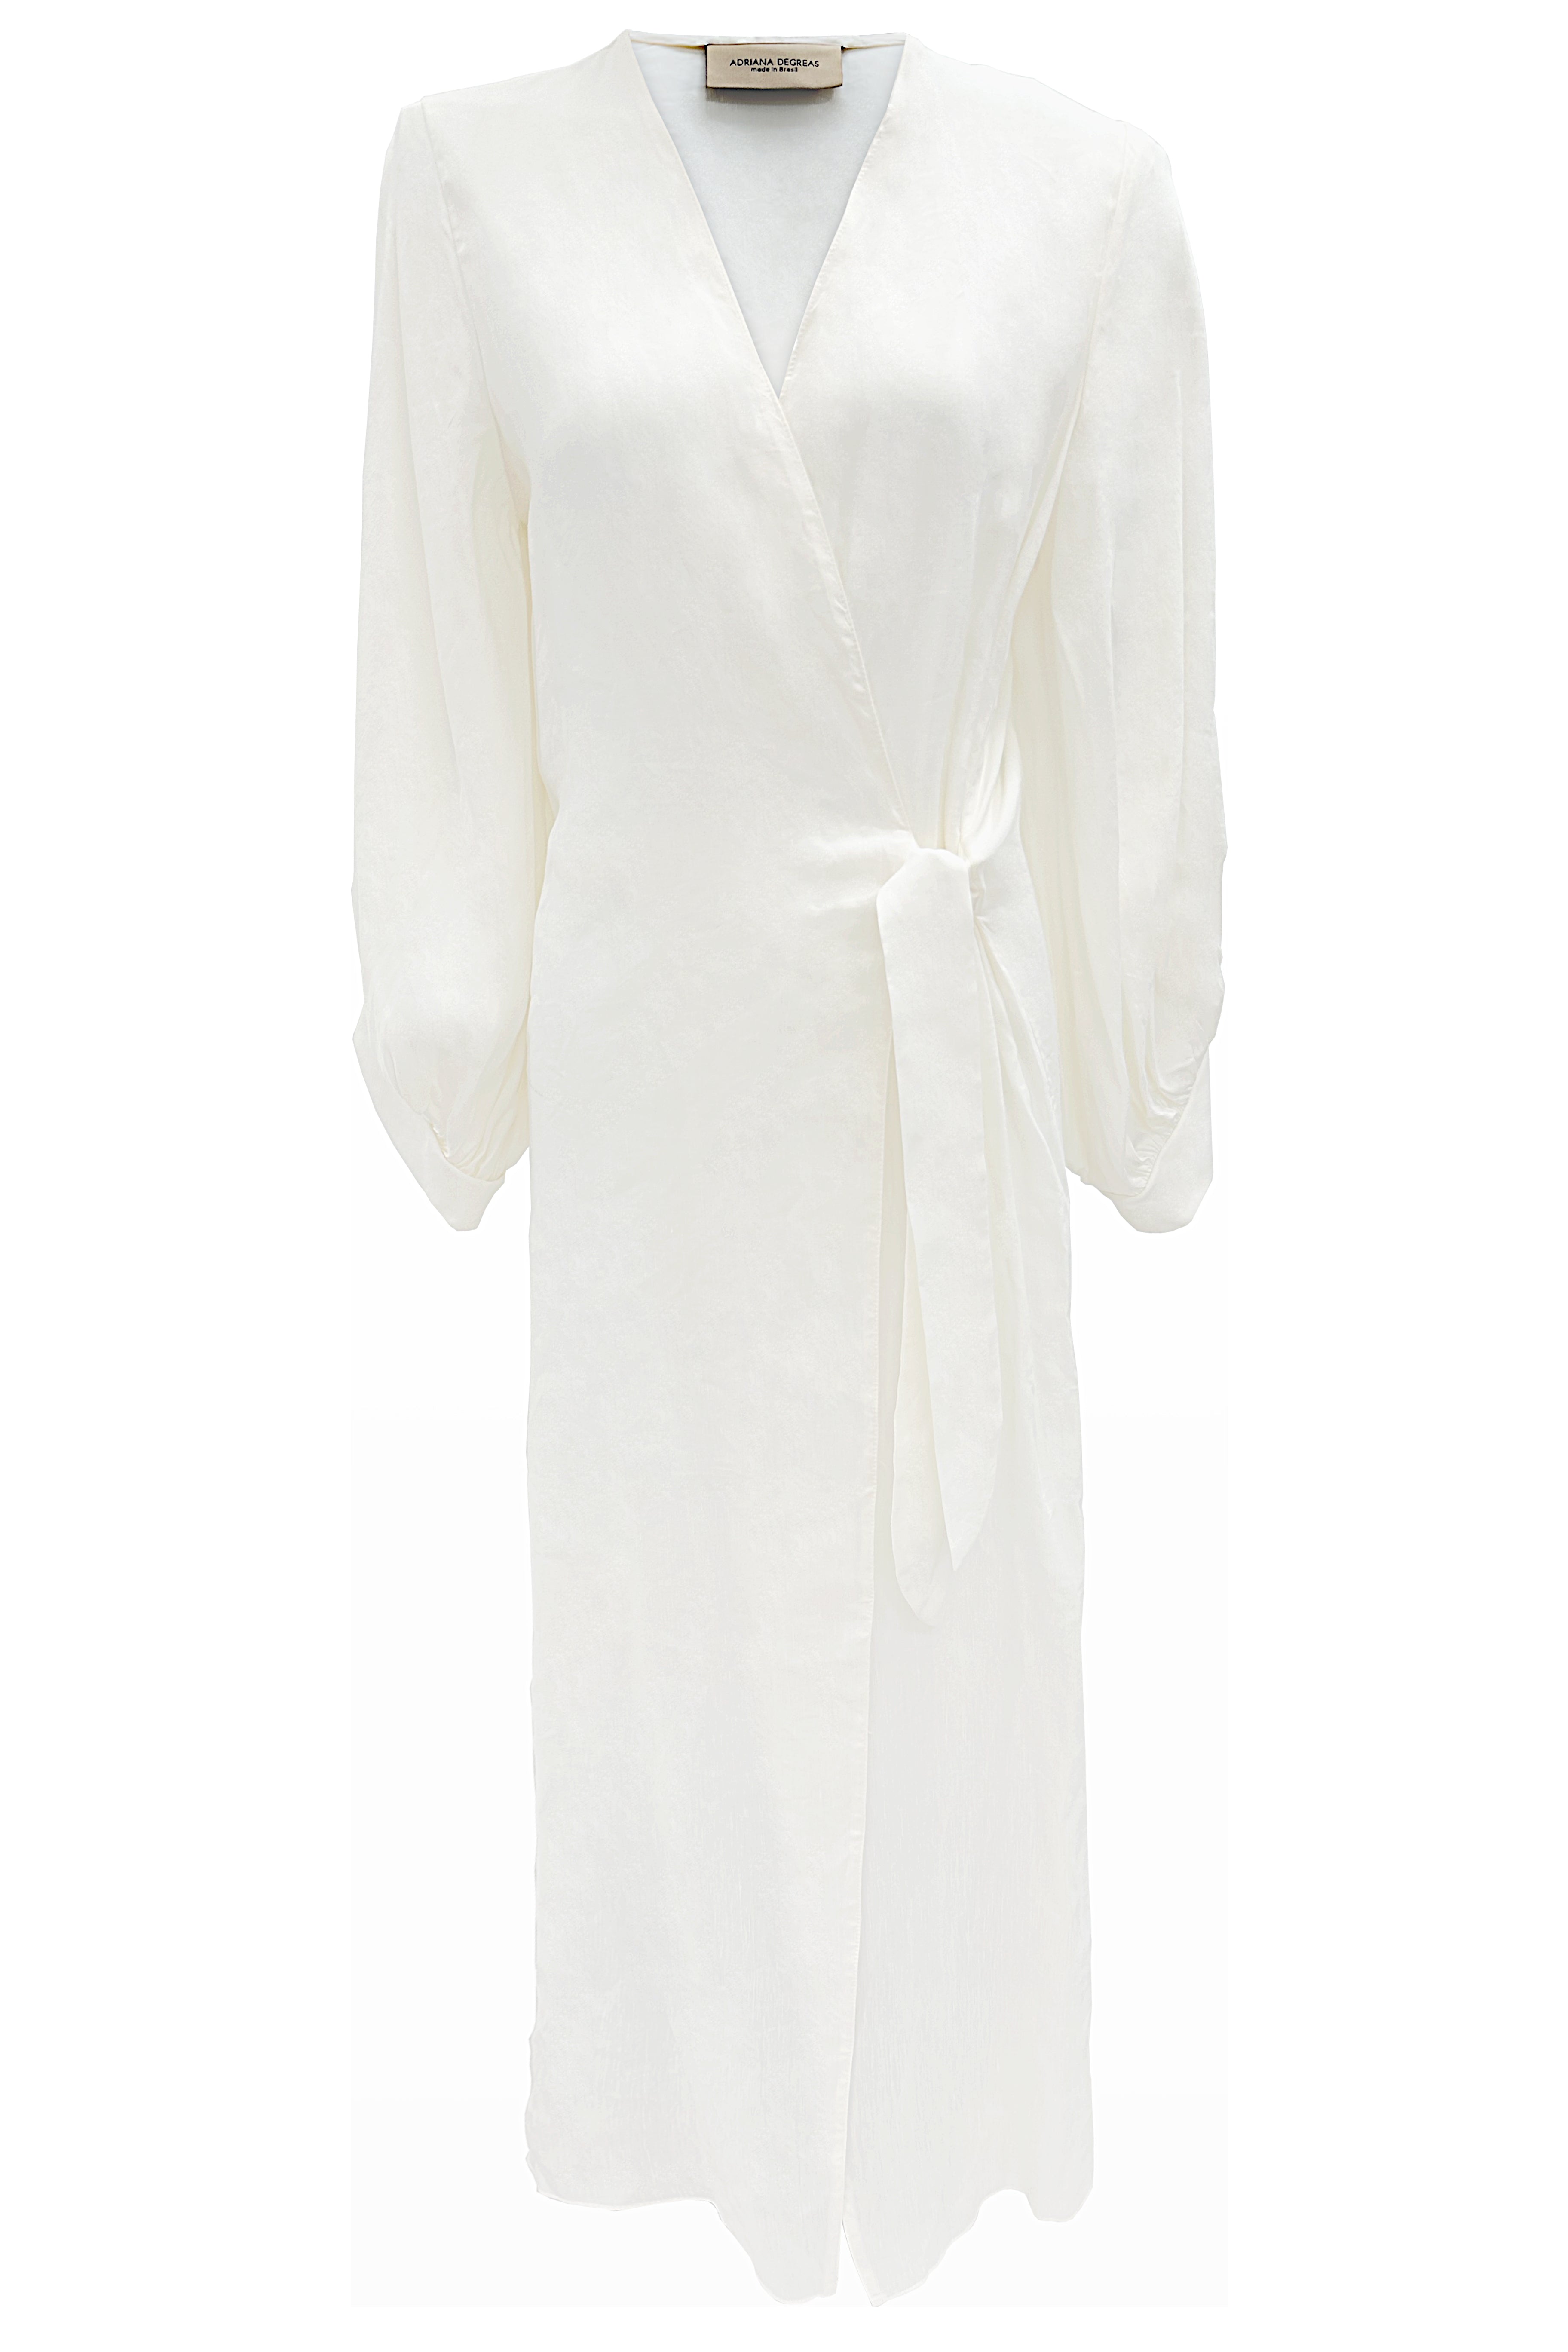 Solid Carre Vintage Off White Long Robe Product